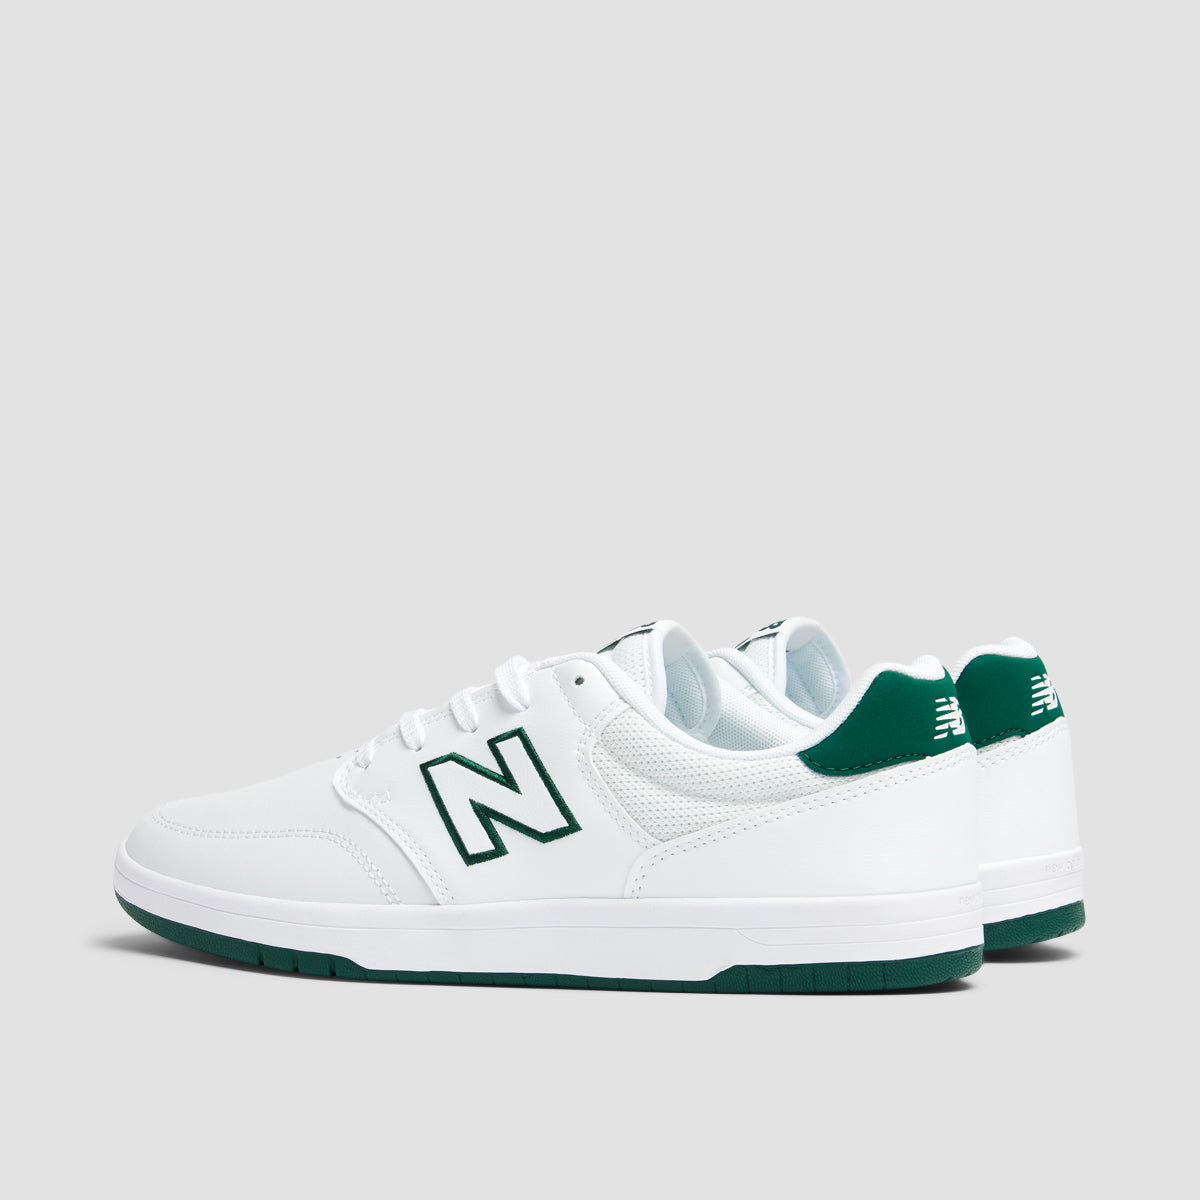 New Balance Numeric 425 Shoes - White/Green